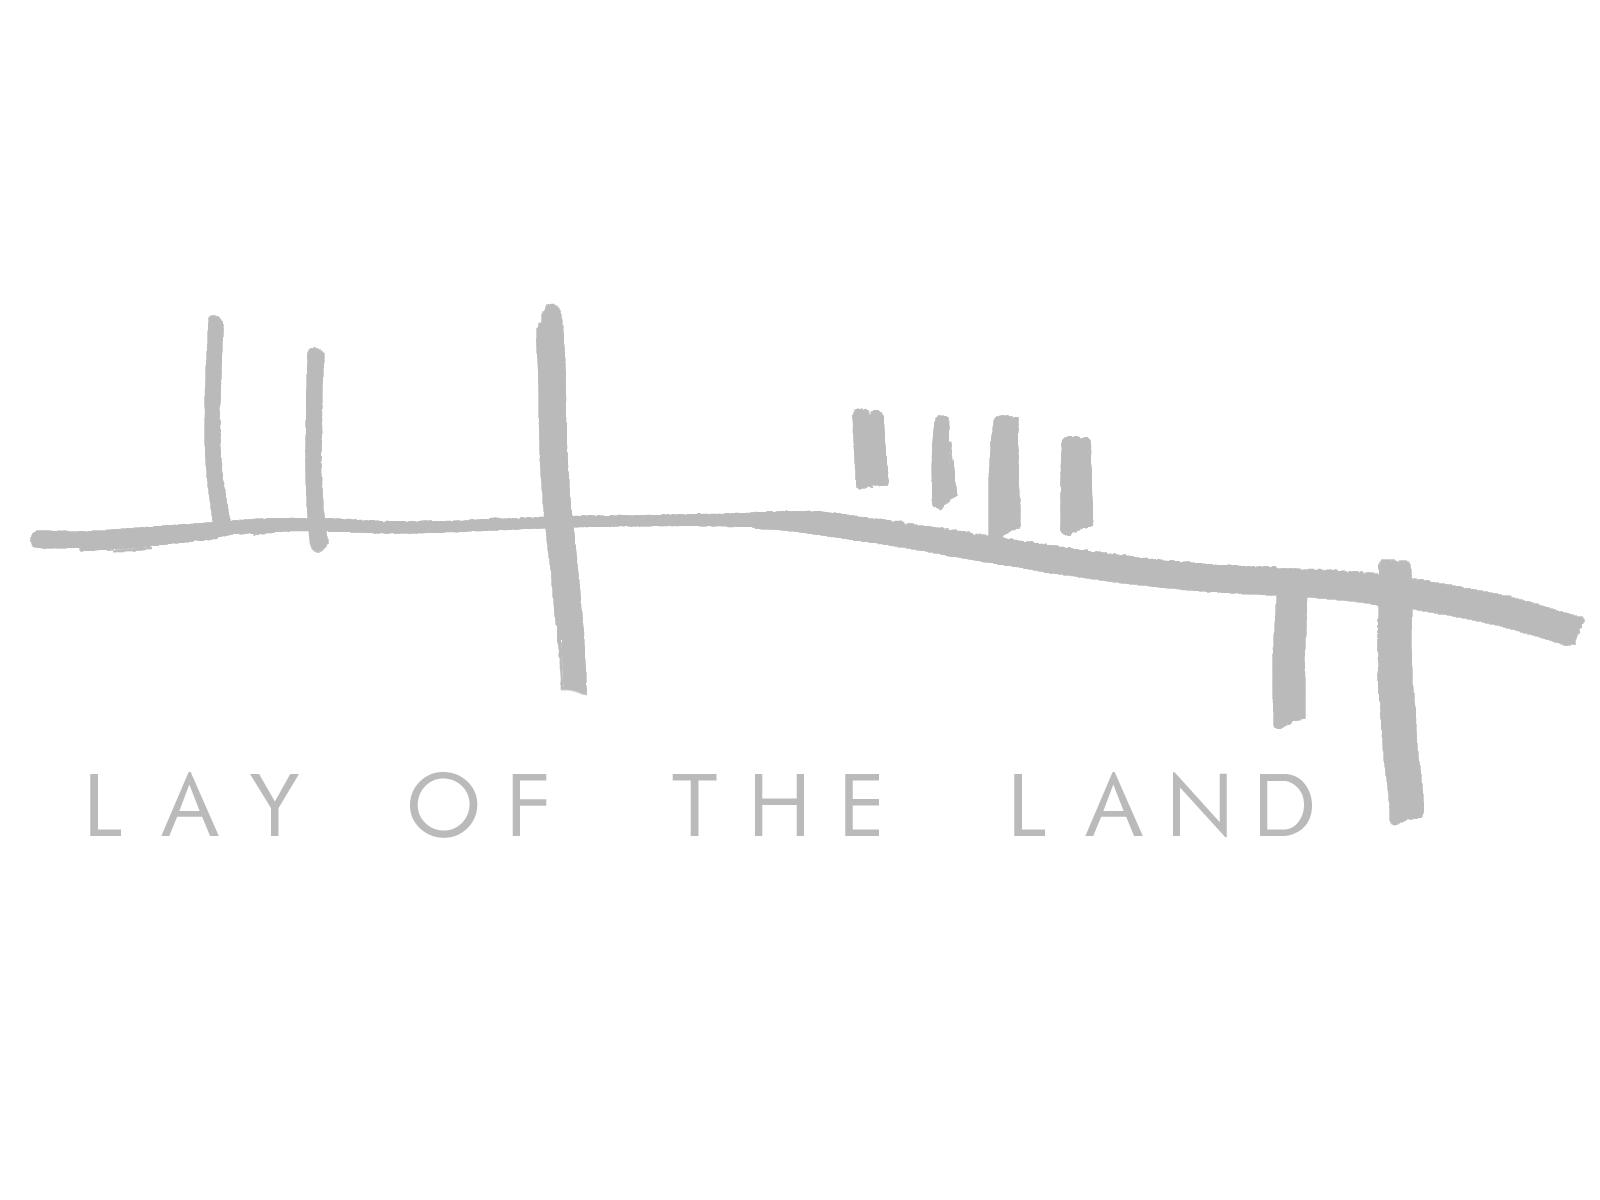 Lay of the land